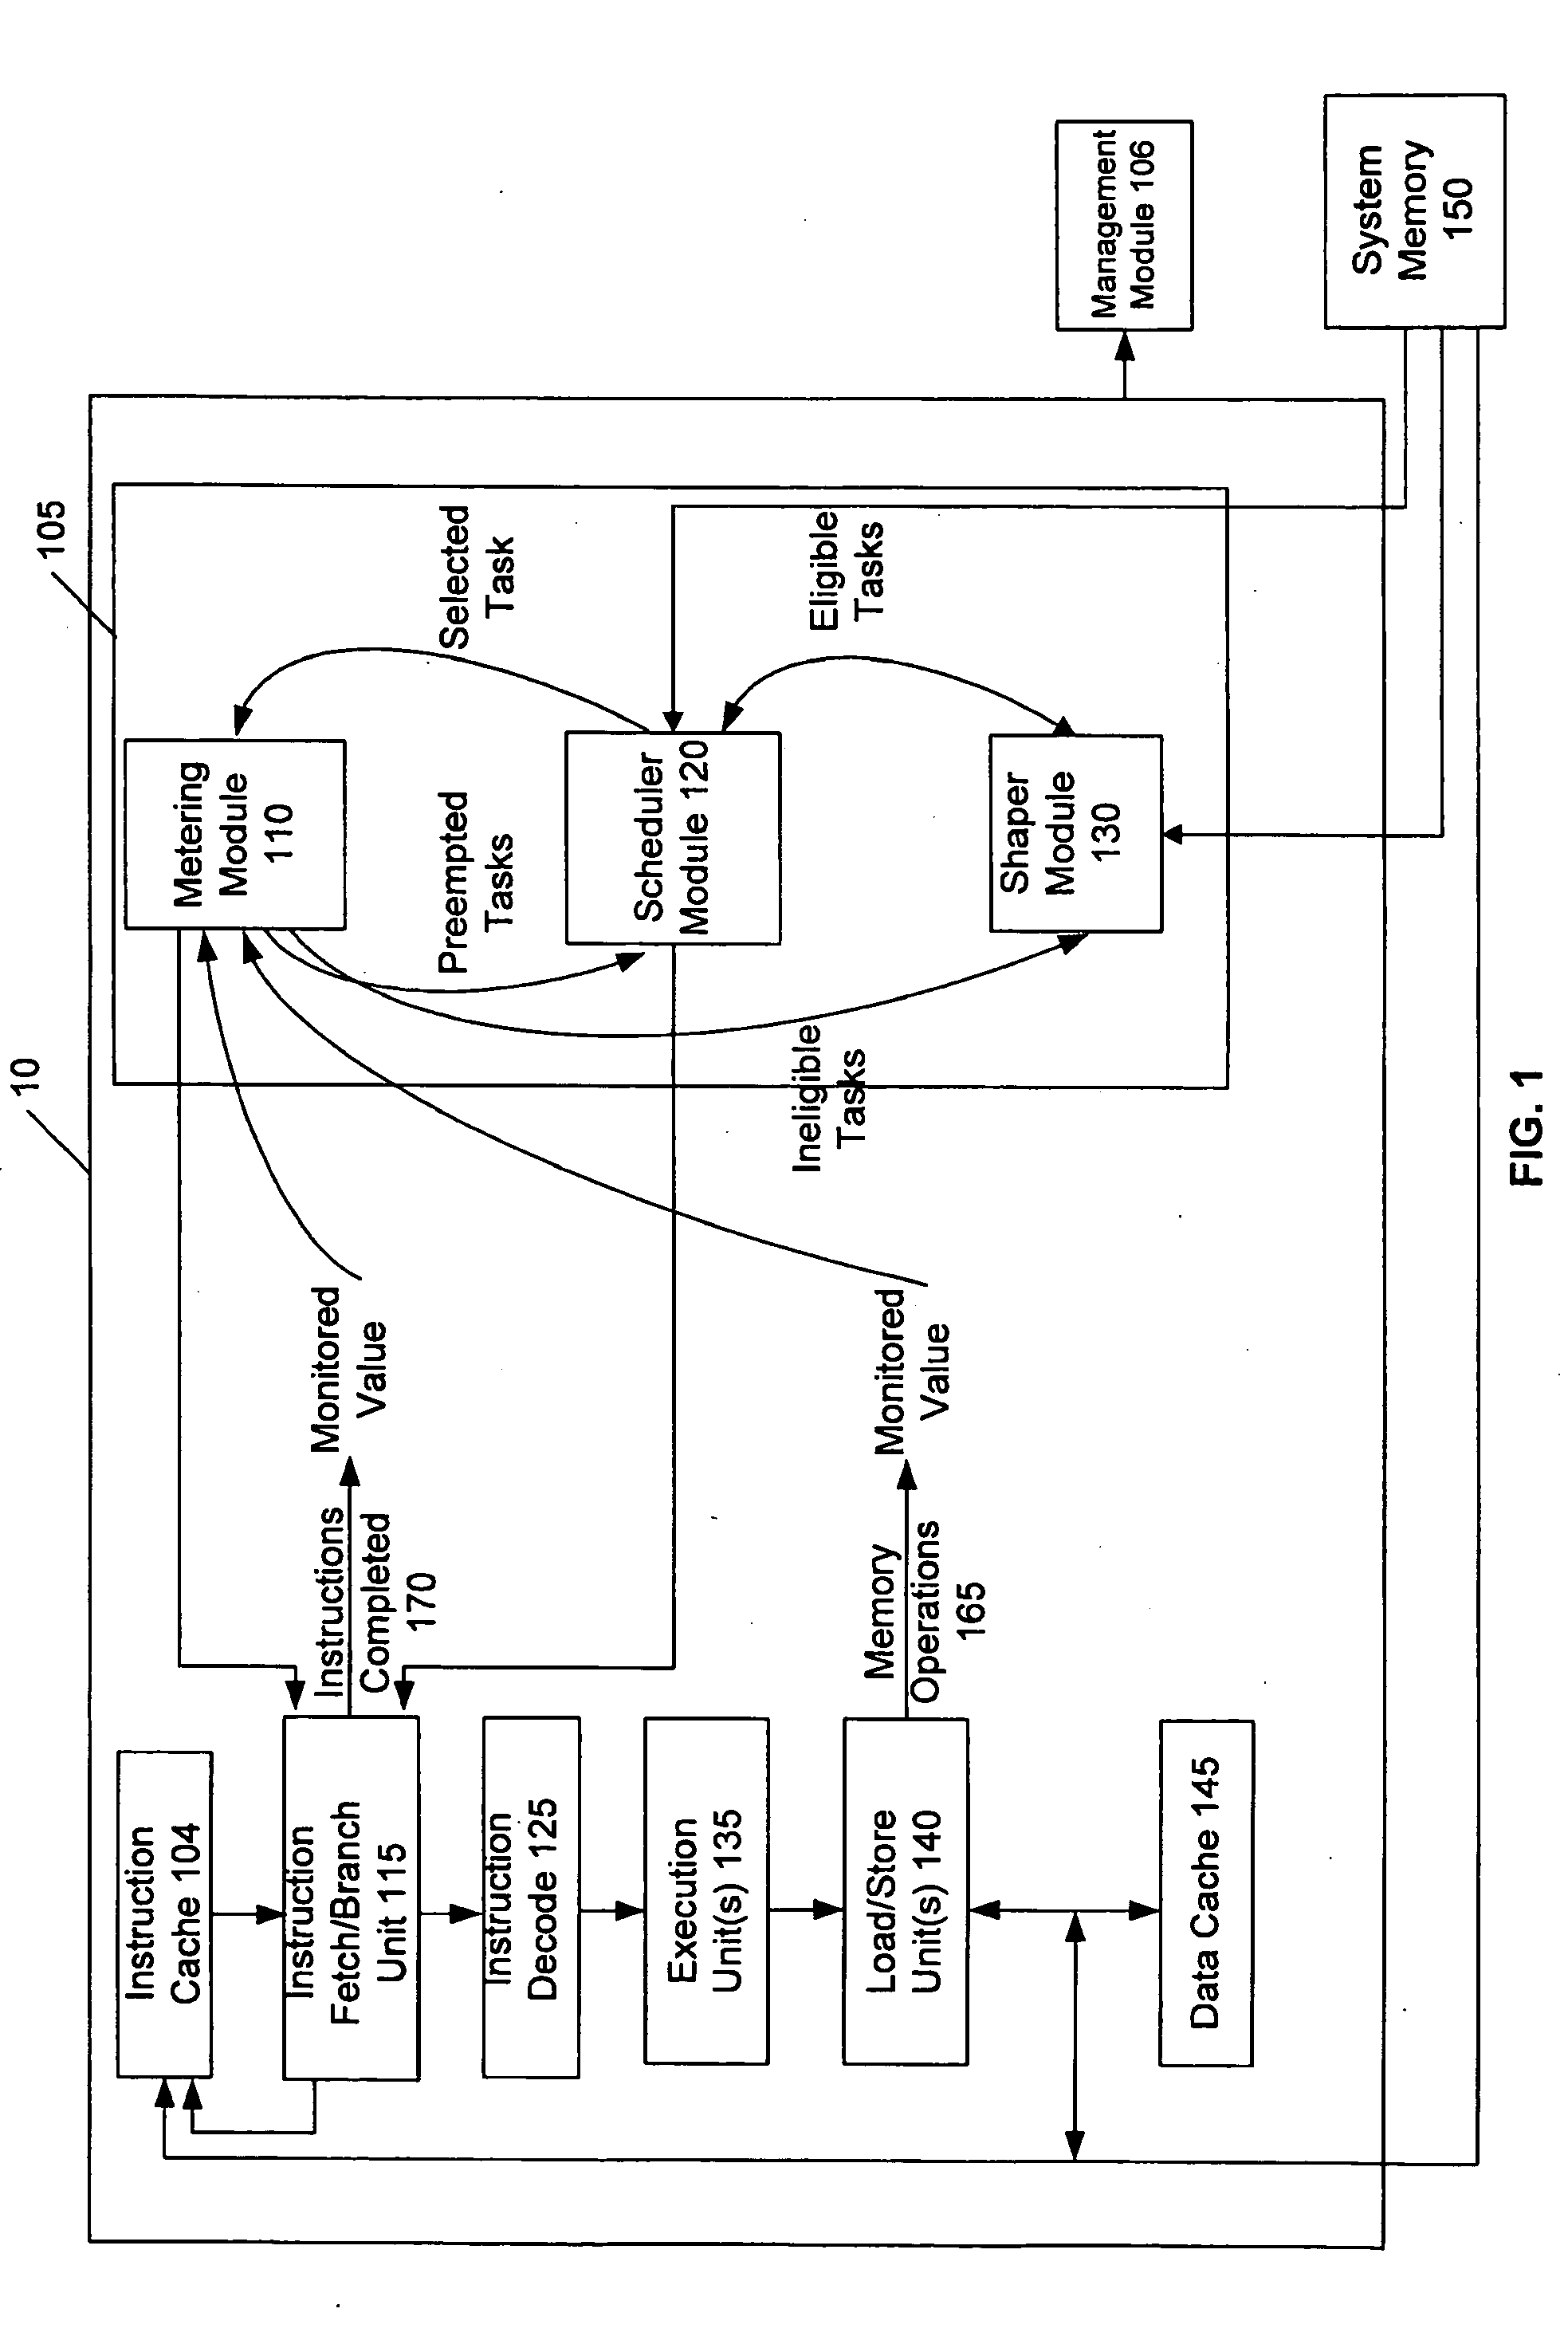 Method and apparatus for fine grain performance management of computer systems